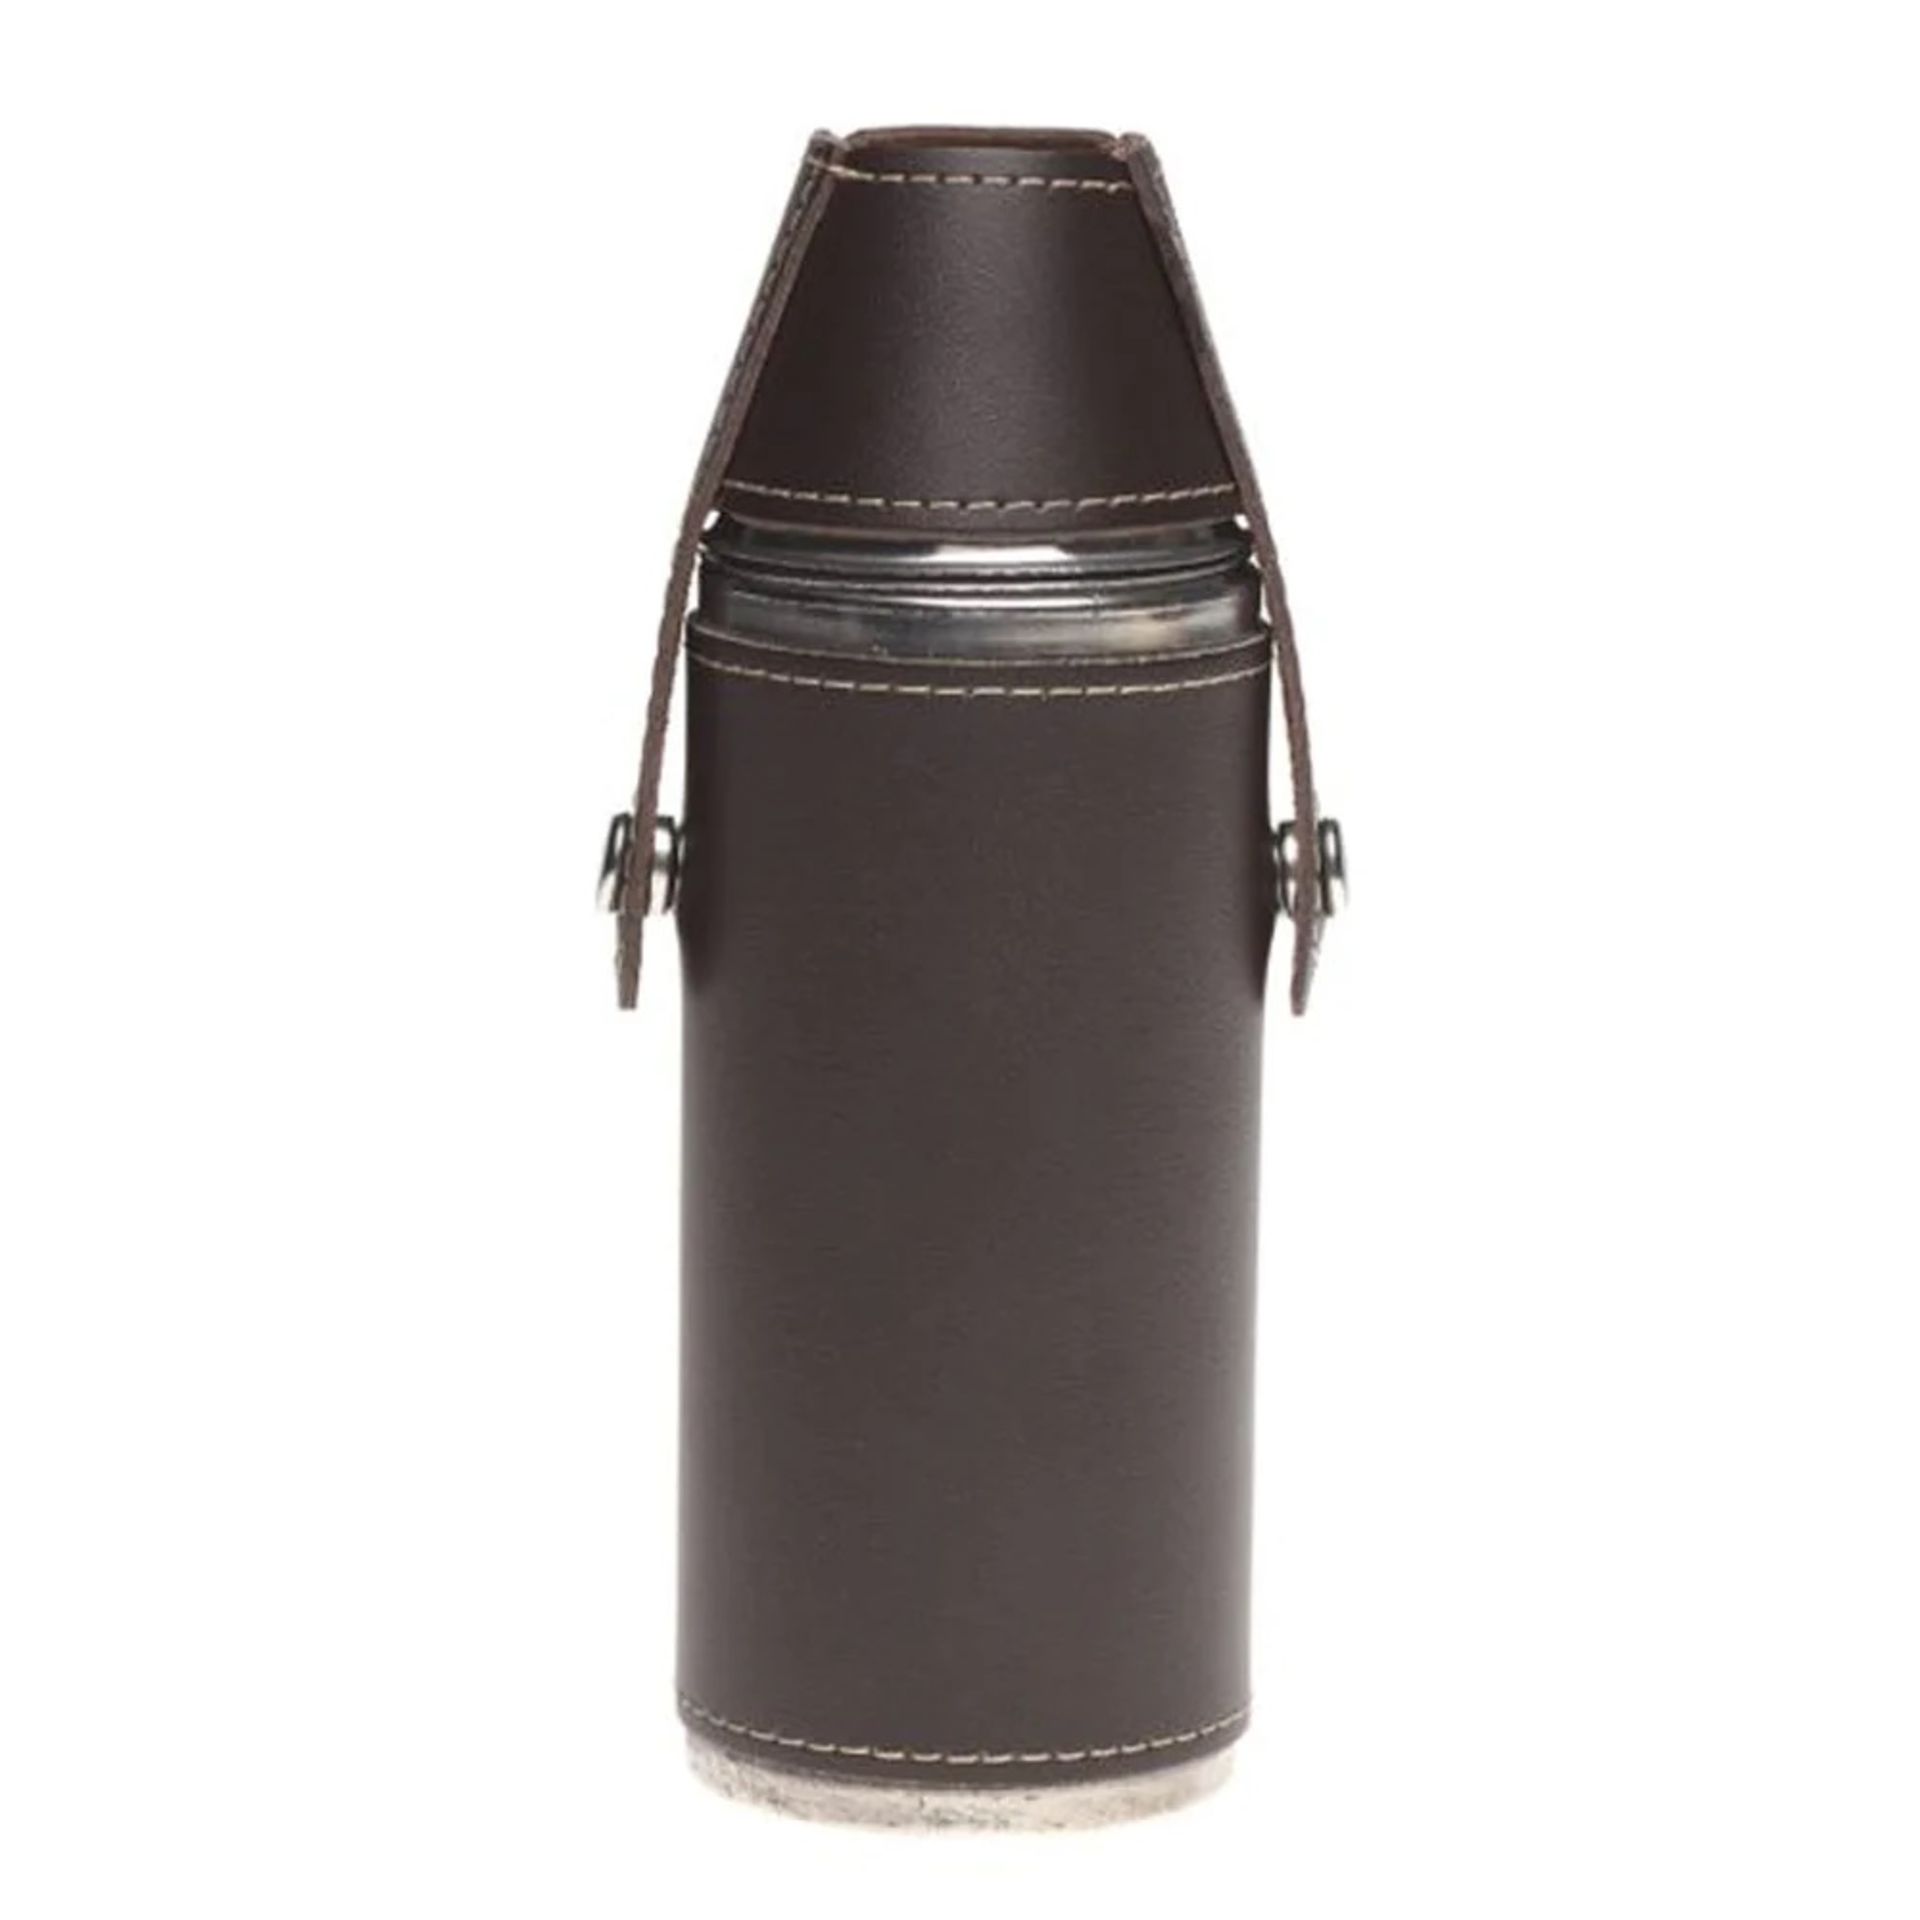 2 x Kikkerland 8oz Leather Clad Camping Flask Sets With Drinking Shot Cups - New Stock - RRP £60 - Image 4 of 5